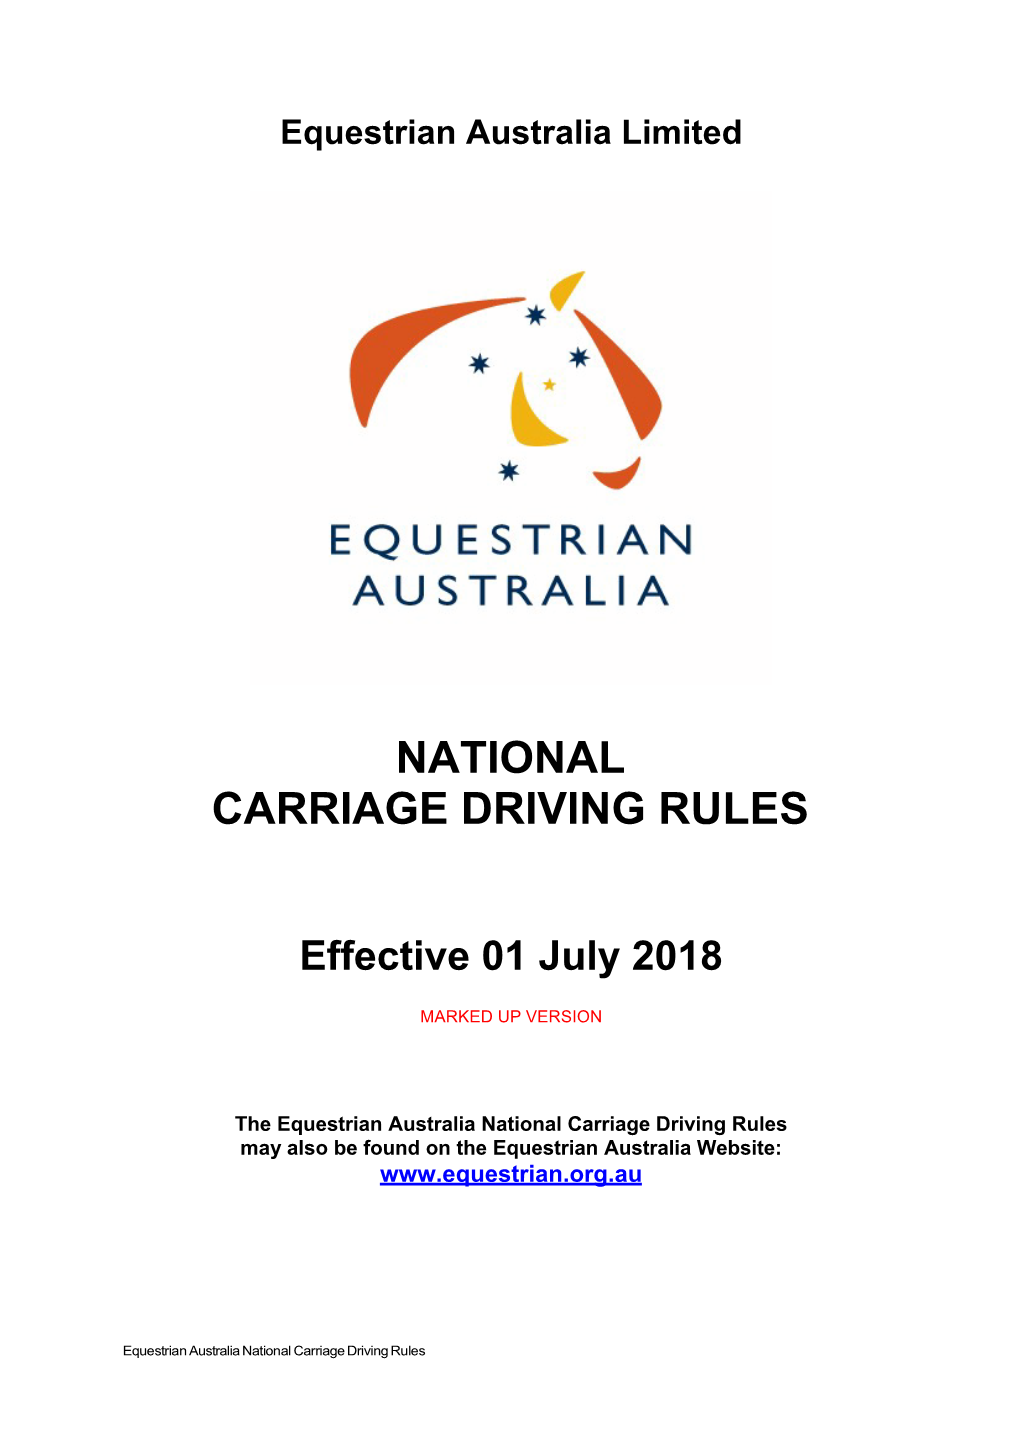 National Carriage Driving Rules